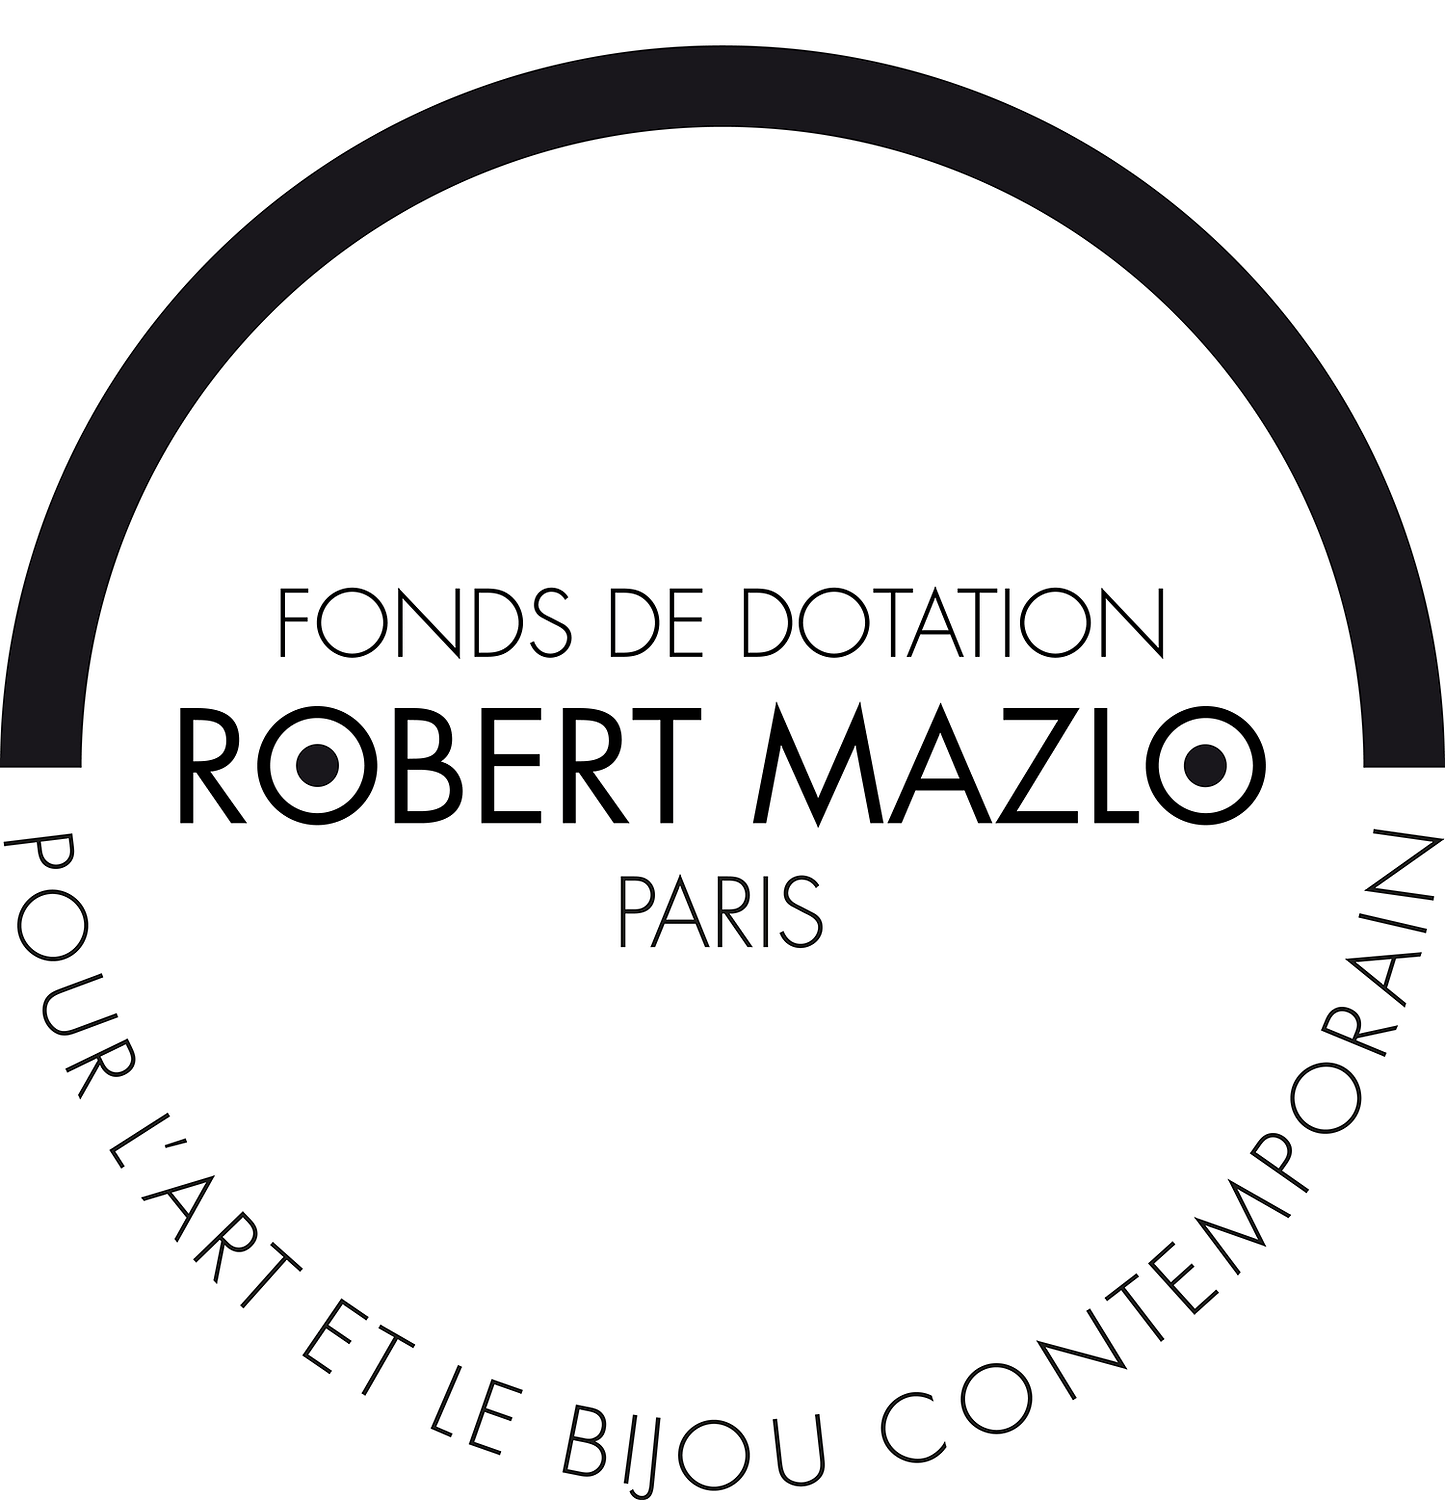 Robert Mazlo Endowment Fund for art and contemporary art jewellery